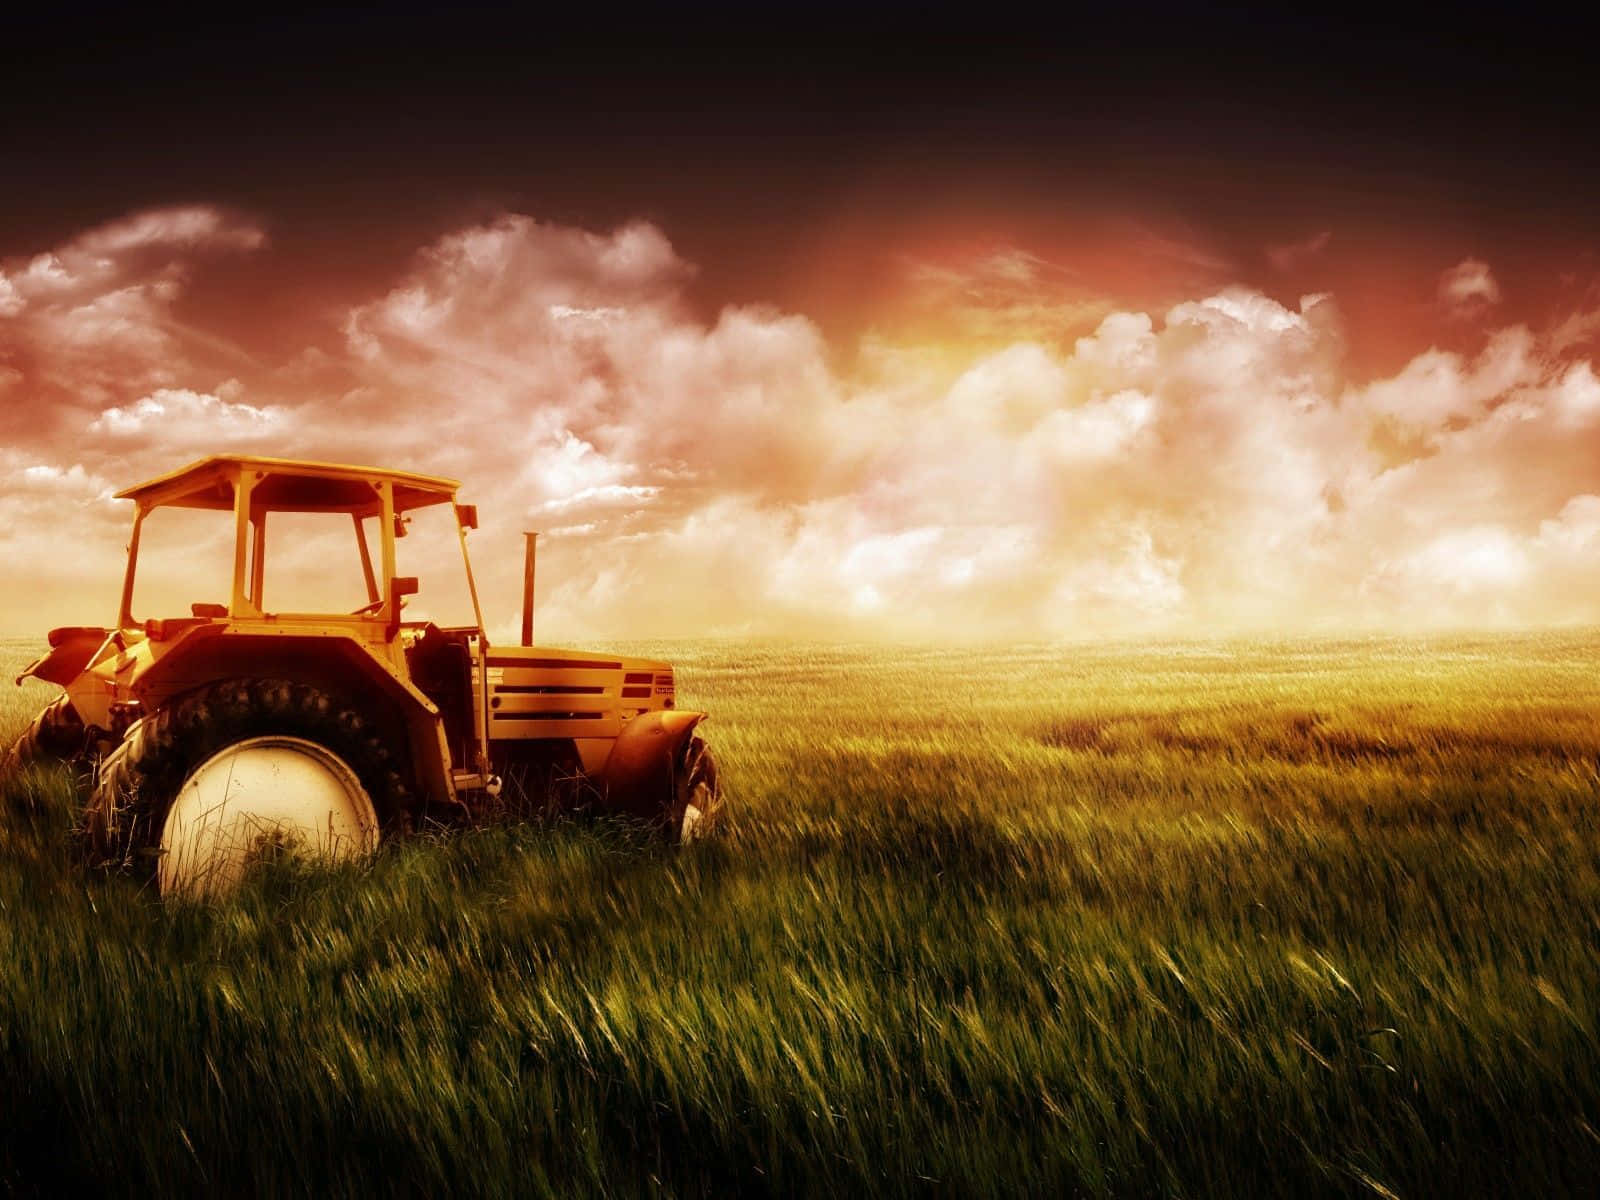 A Tractor In A Field With A Sunset Behind It Wallpaper